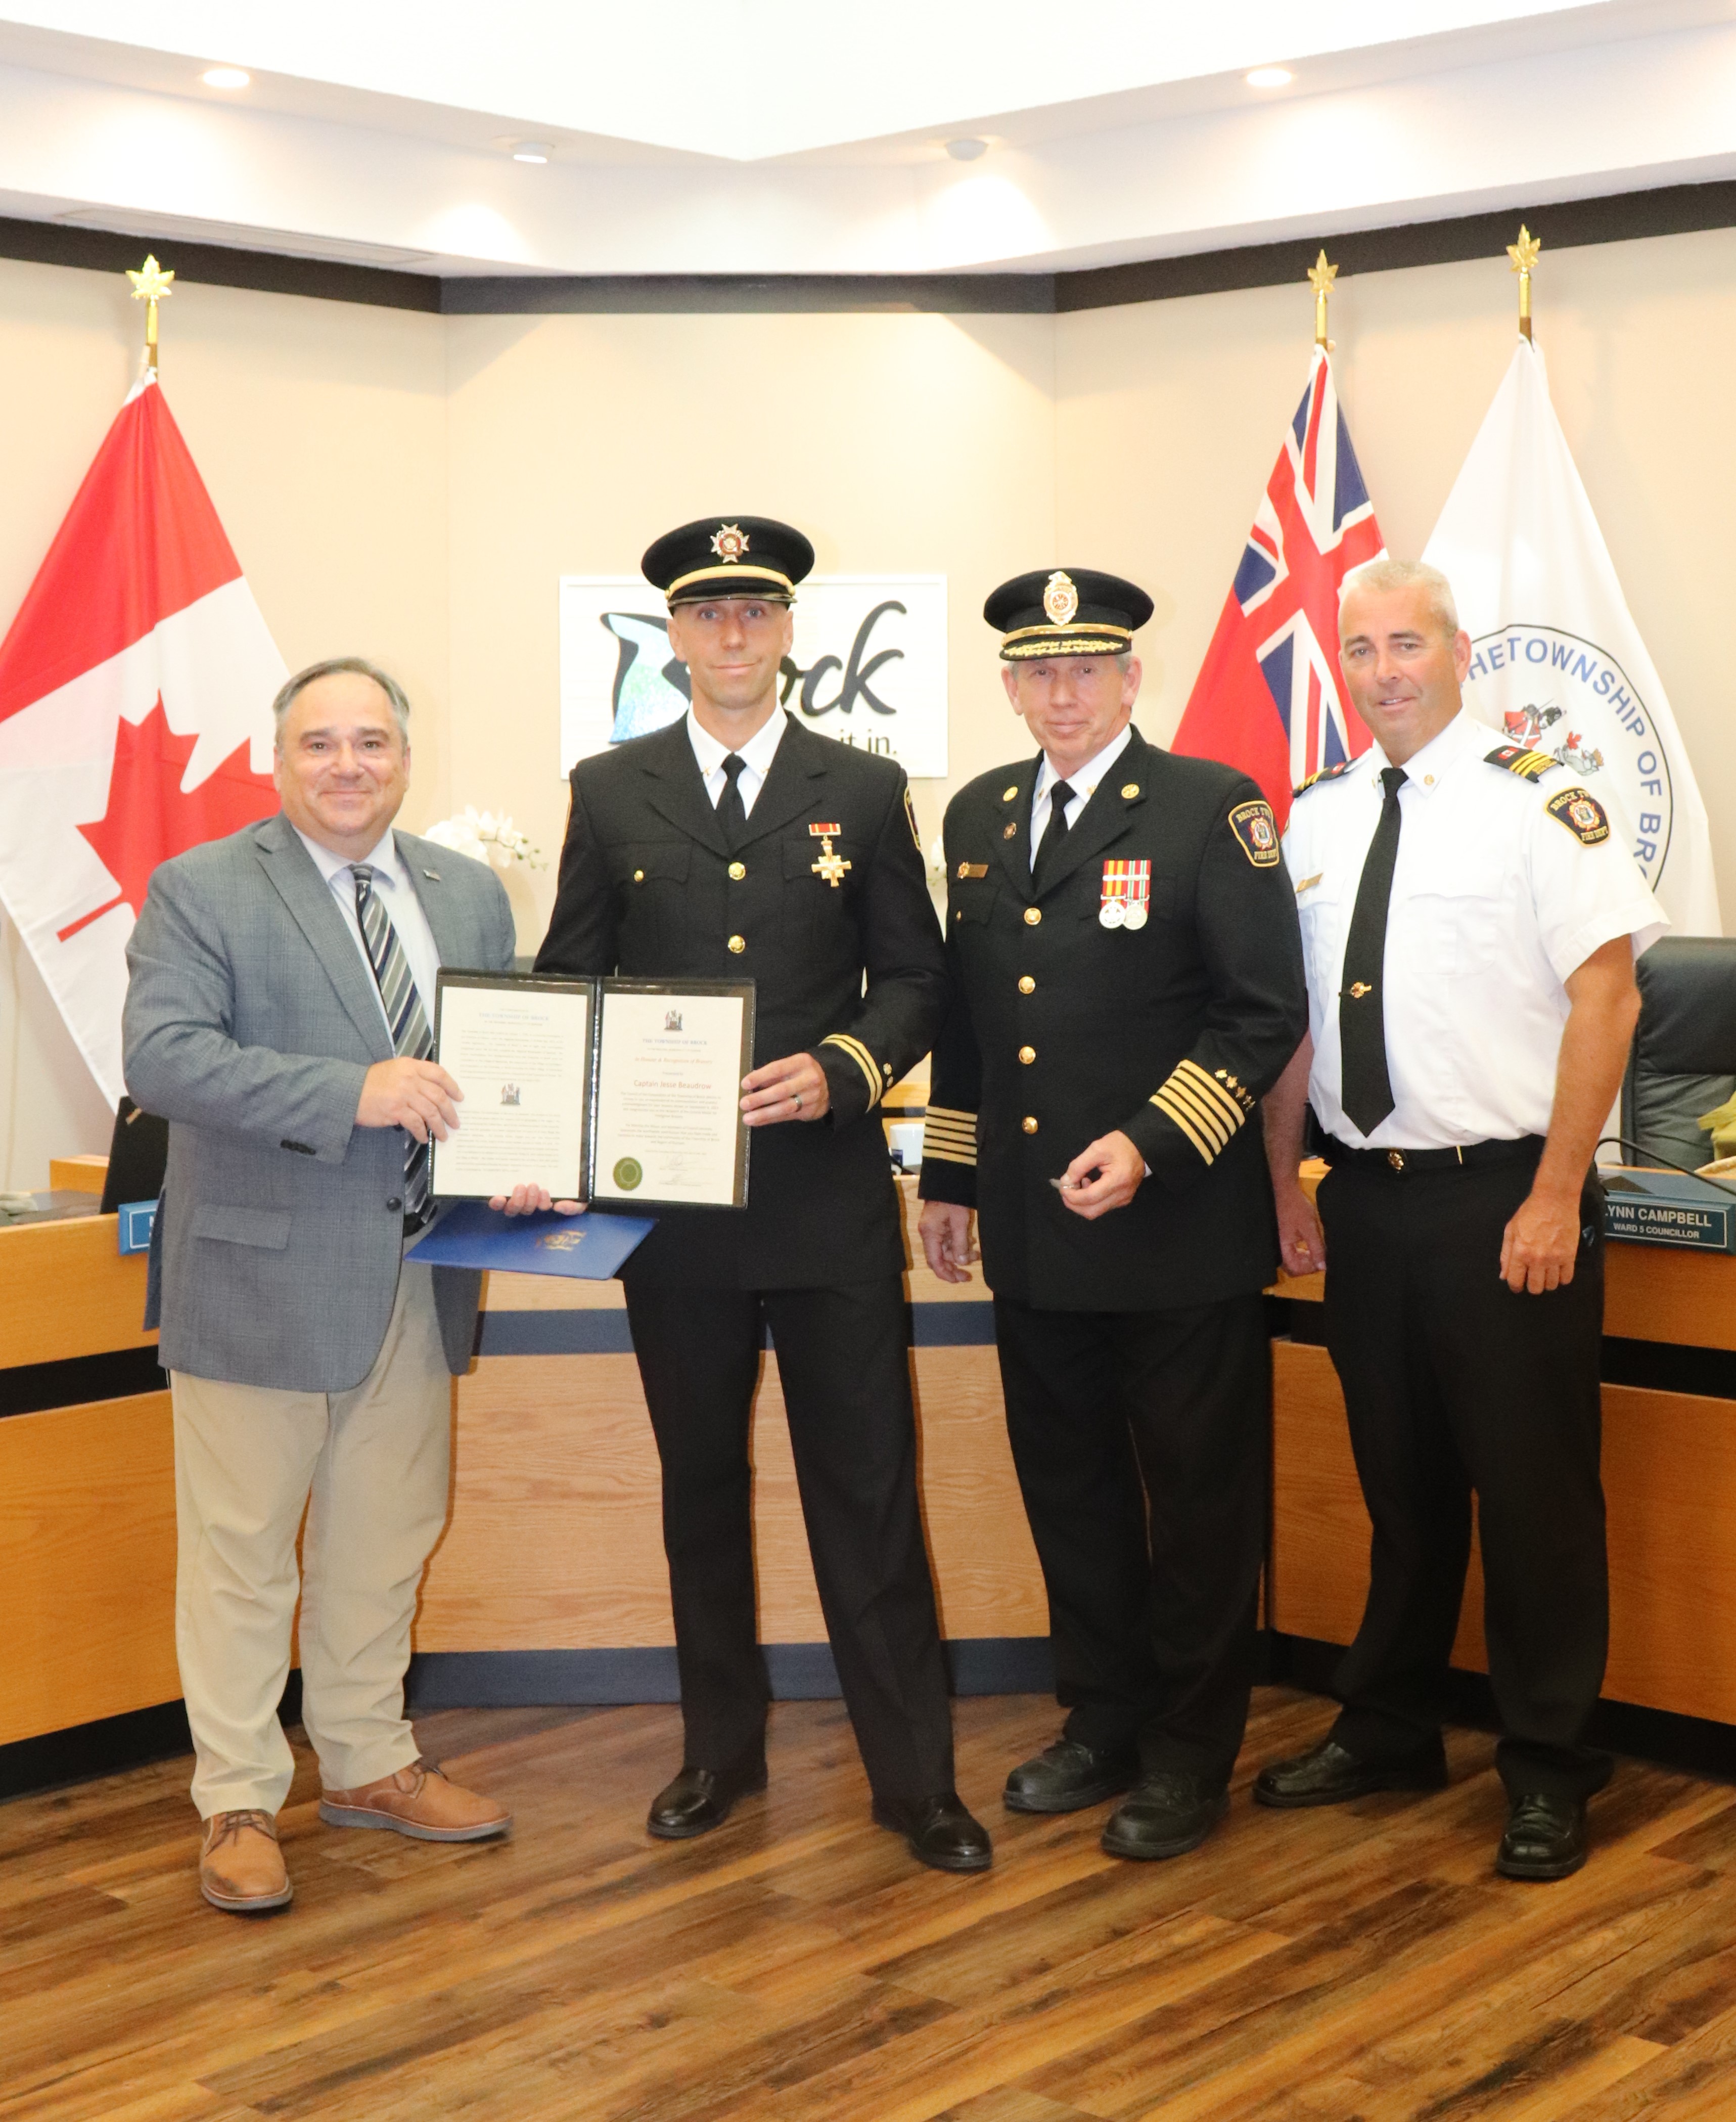 Mayor Walter Schummer and members of Council, along with District Chief Chris Gillespie and Brock Fire Chief Rick Harrison were honoured to mark this incredible act of bravery at today’s Council Meeting. 